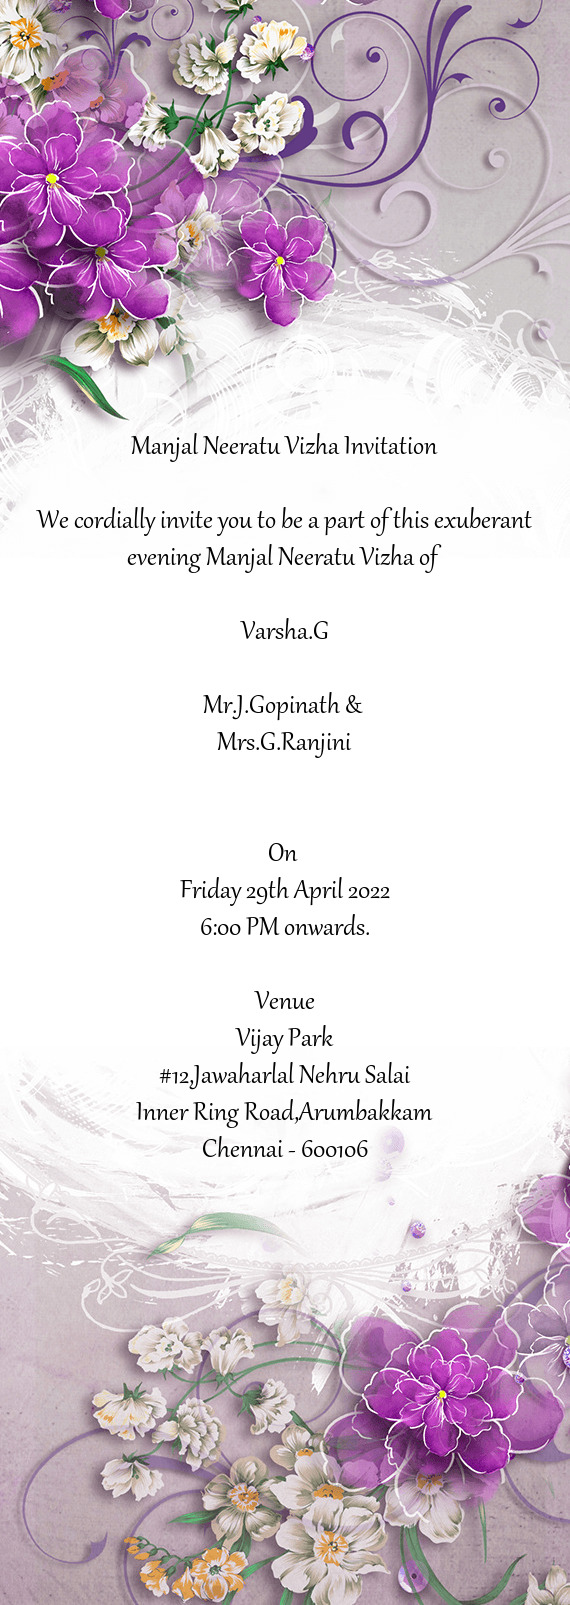 We cordially invite you to be a part of this exuberant evening Manjal Neeratu Vizha of